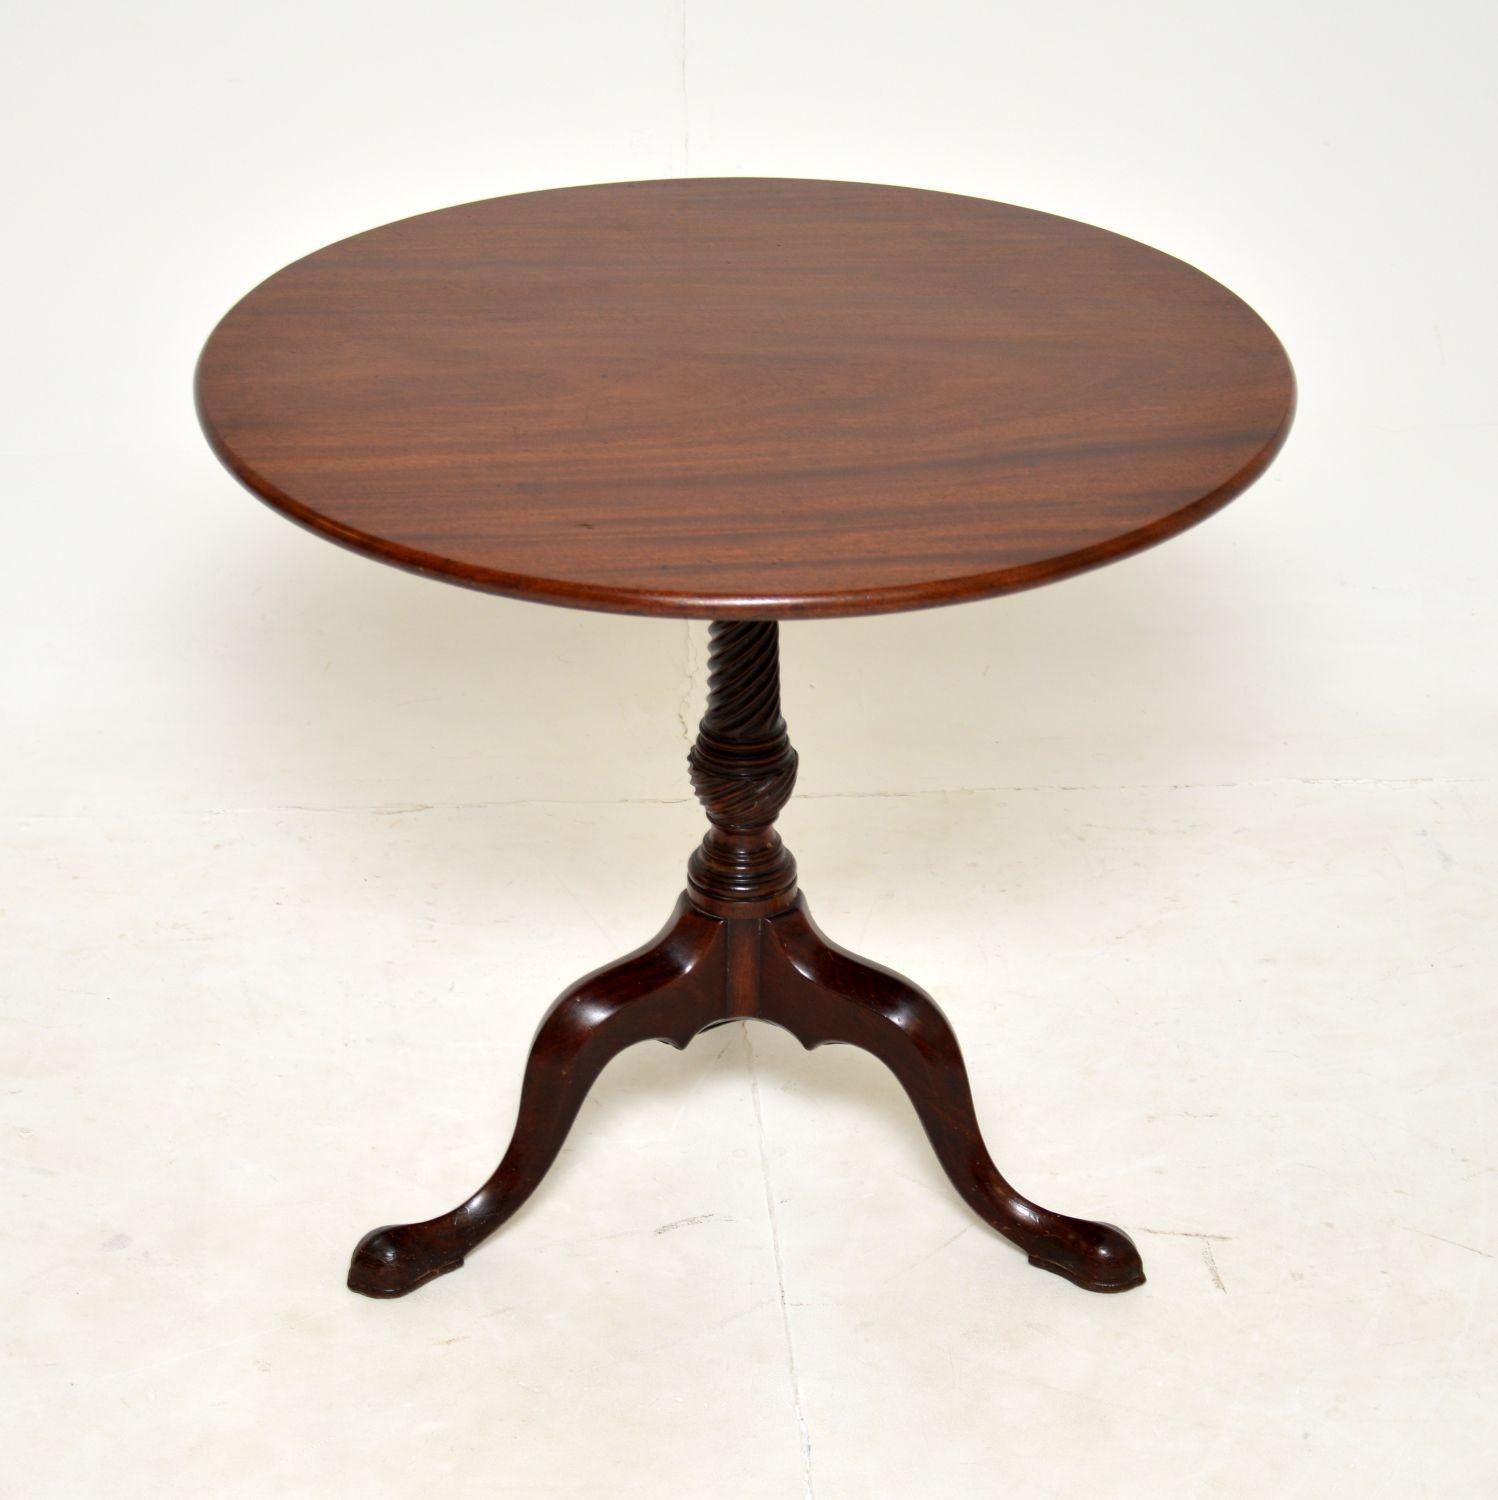 An excellent original antique George III period snap top occasional table. This was made in England, it dates from around the 1790’s period.

This is of superb quality and it’s a great size. The circular top has a gorgeous colour tone and